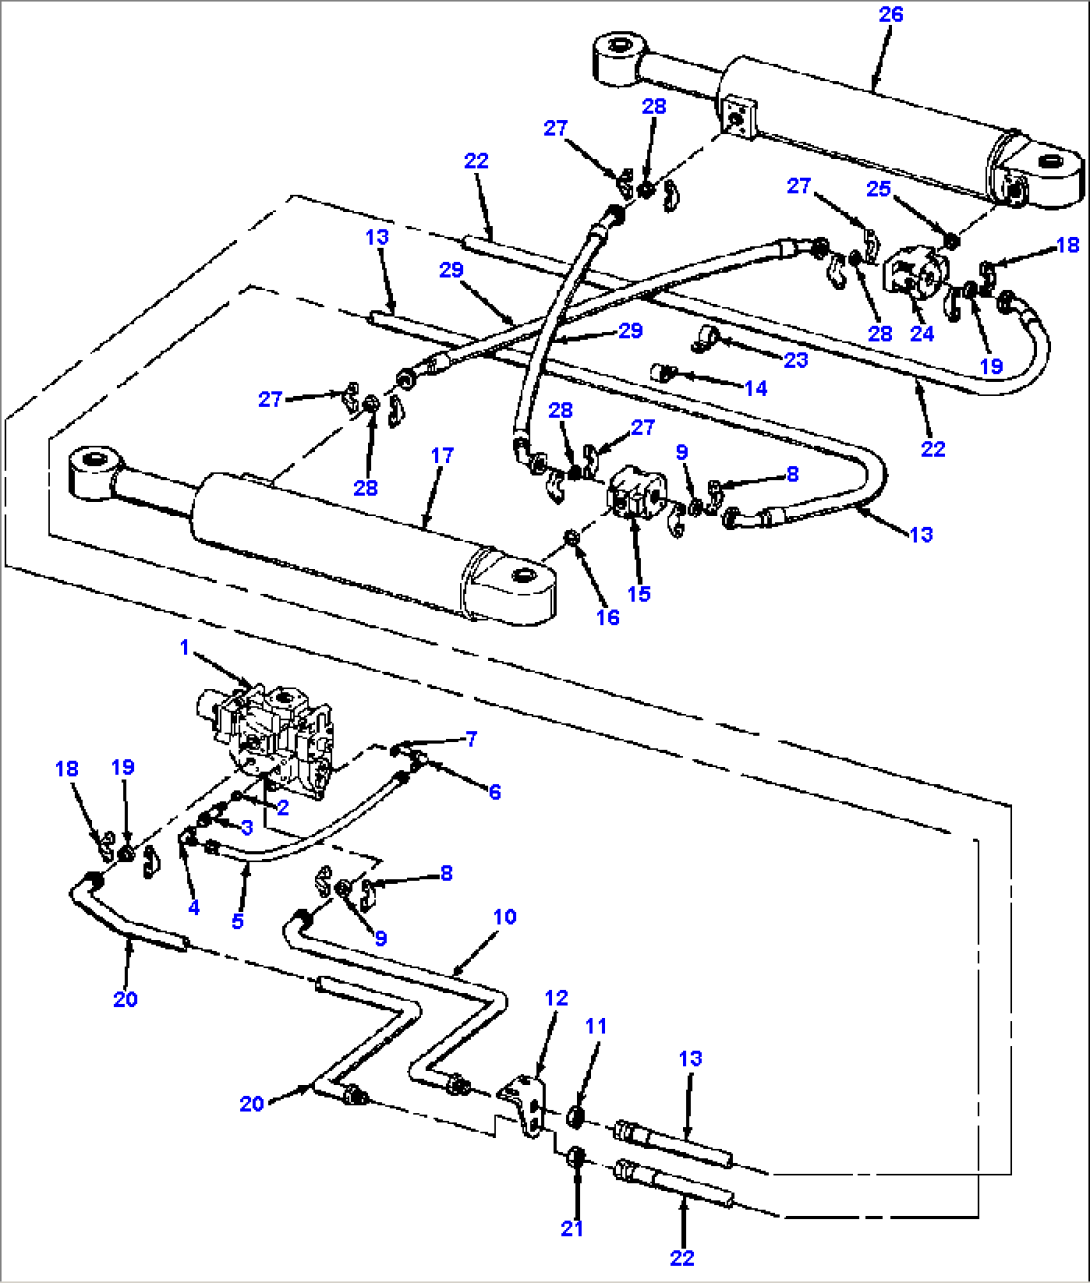 HYDRAULIC PIPING STEERING CONTROL VALVE TO CHECK VALVES AND STEERING CYLINDERS